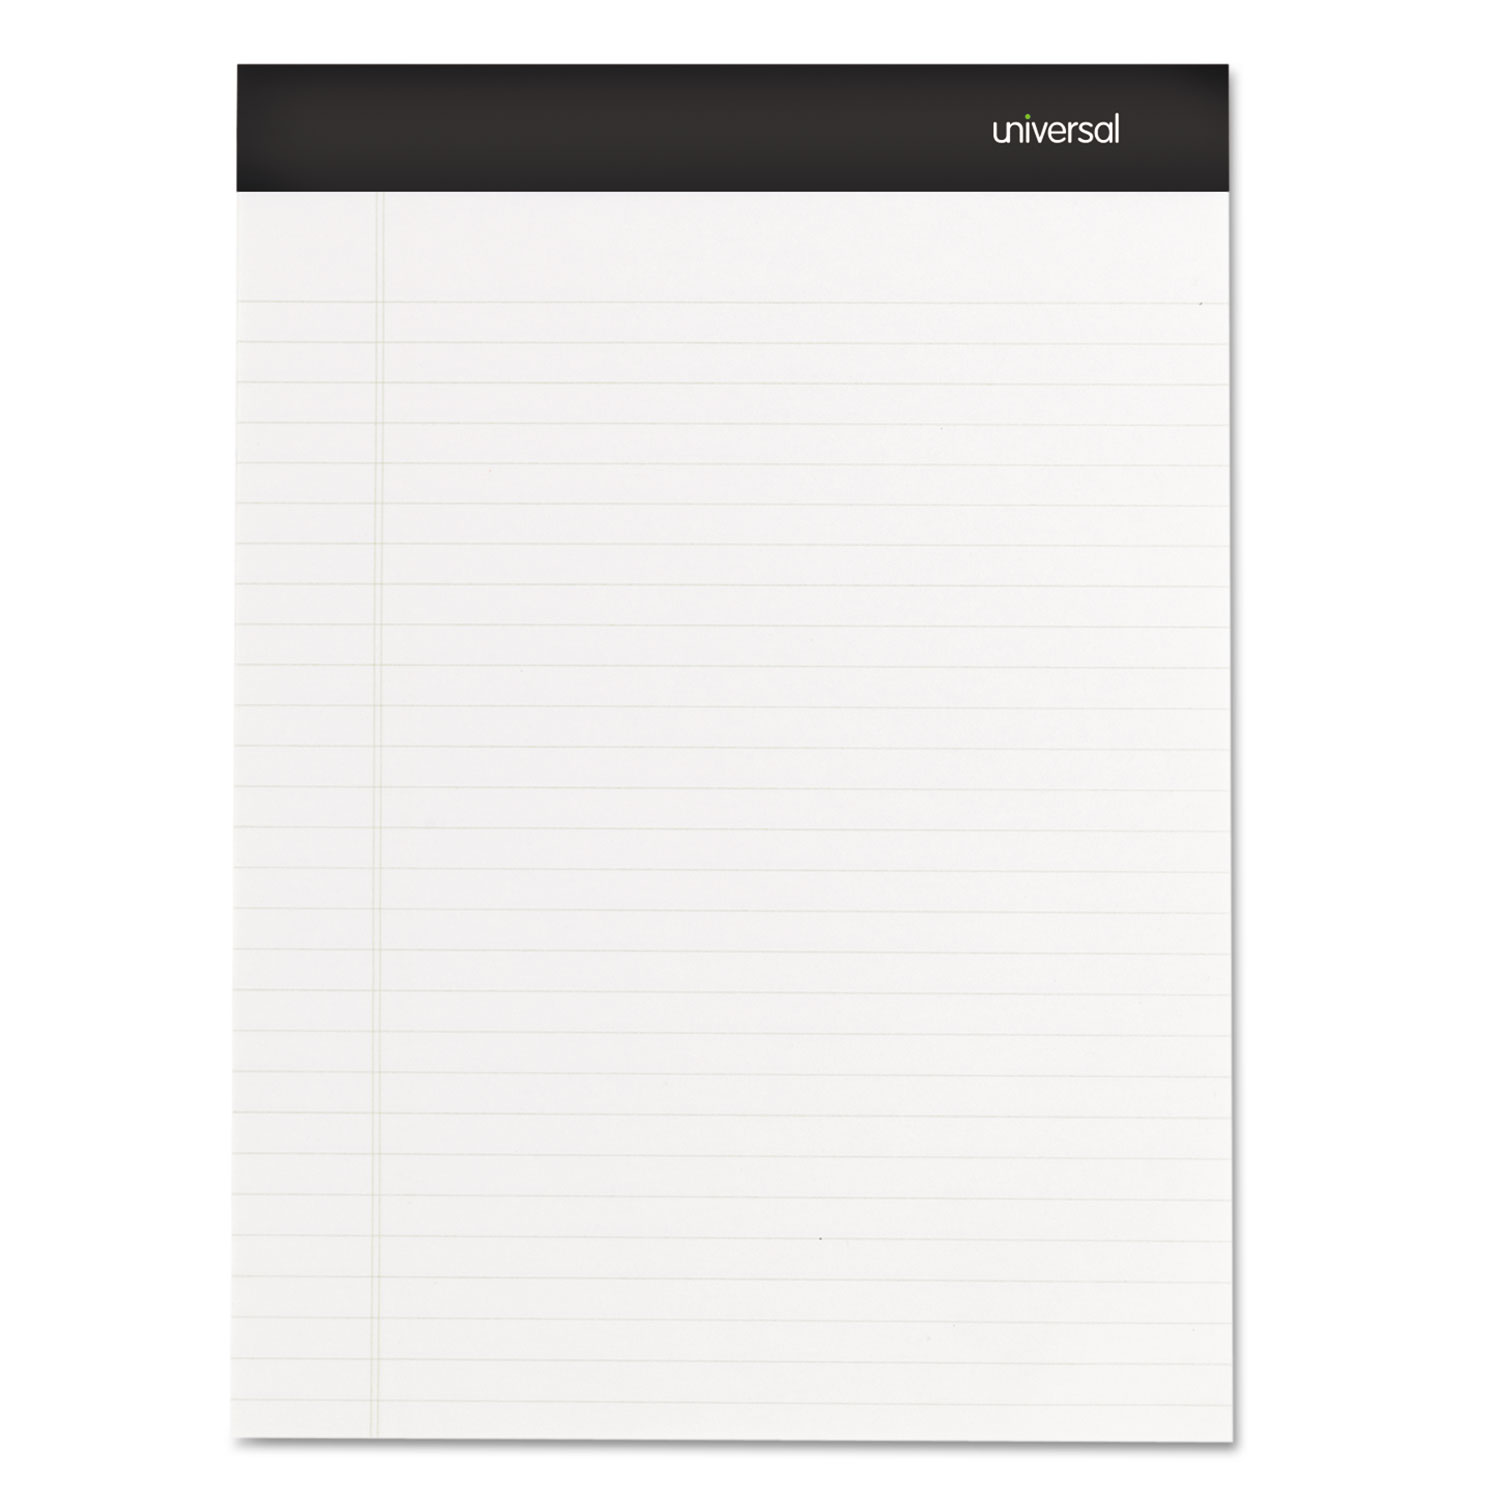  Universal UNV60630 Sugarcane-Based Writing Pads, Wide/Legal Rule, 8.5 x 11.75, White, 50 Sheets, 2/Pack (UNV60630) 